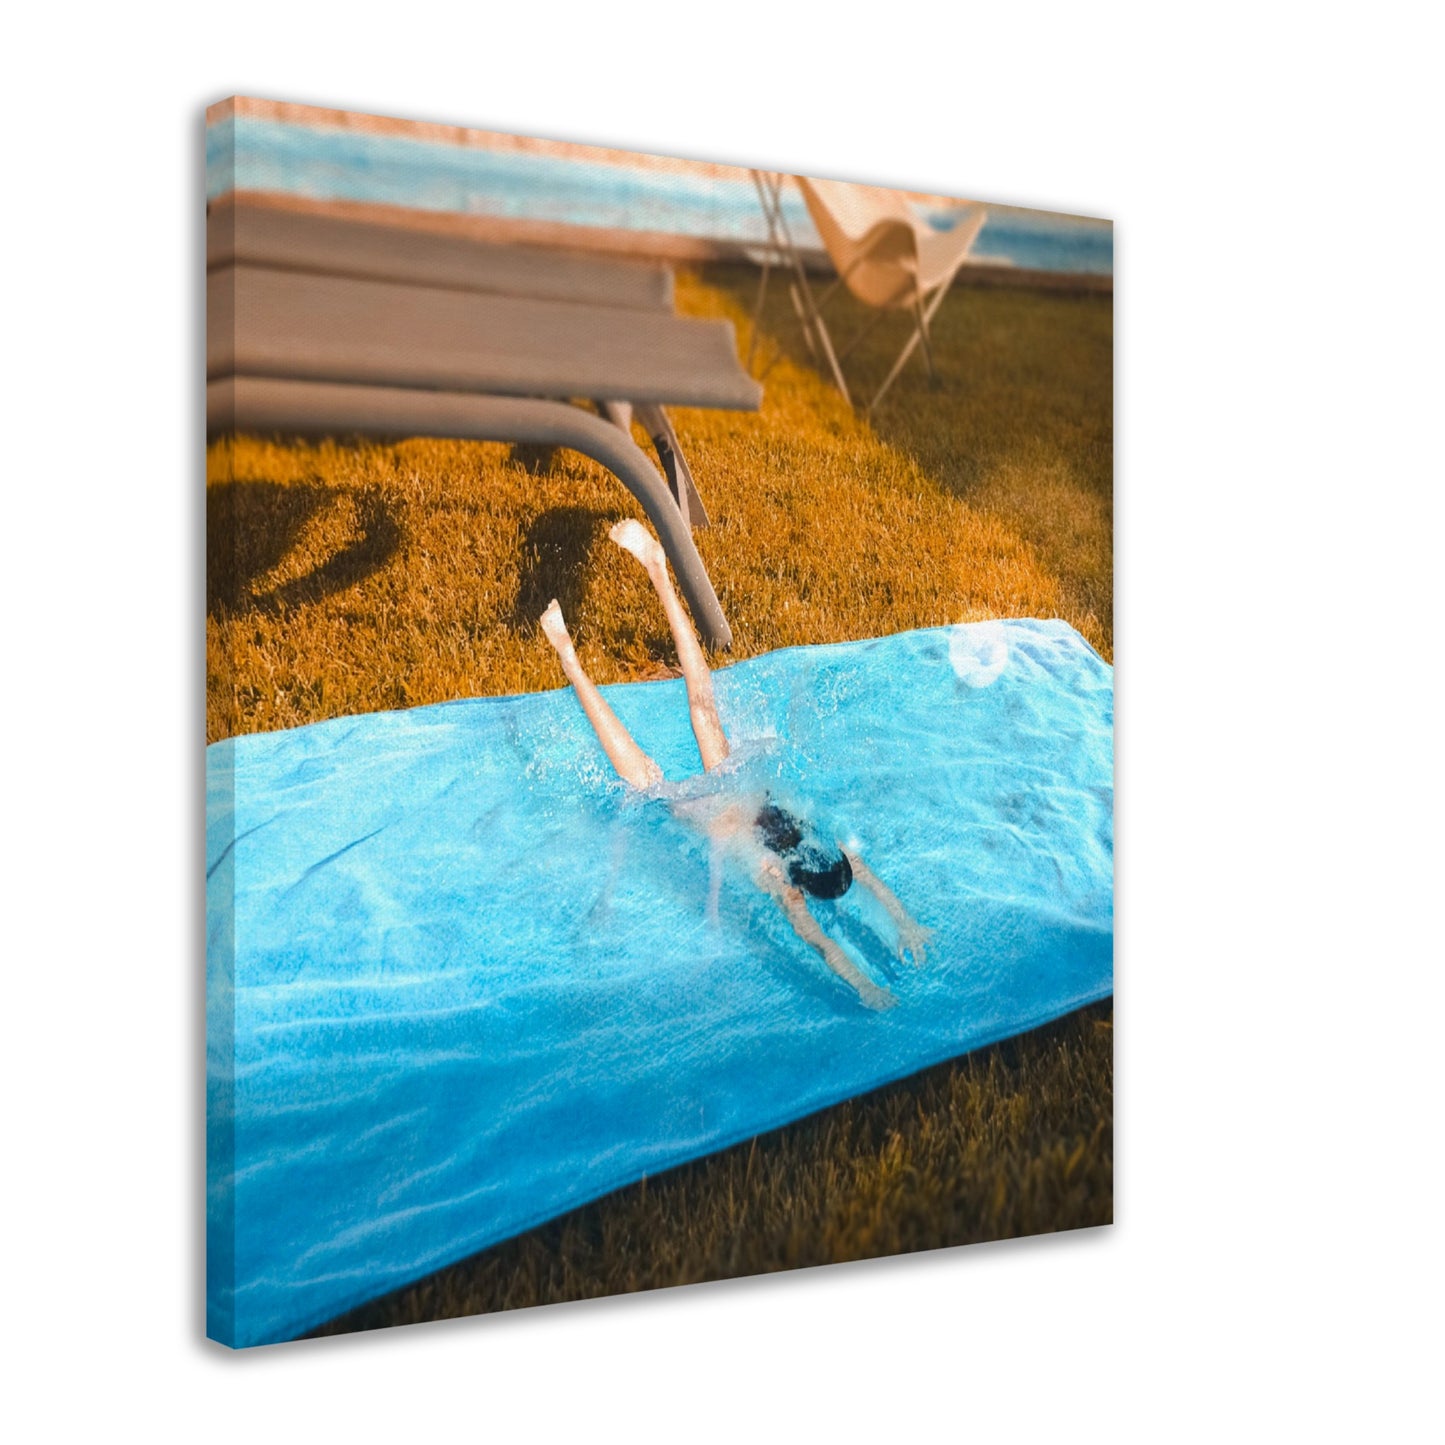 Diving Into Summer - Canvas Print